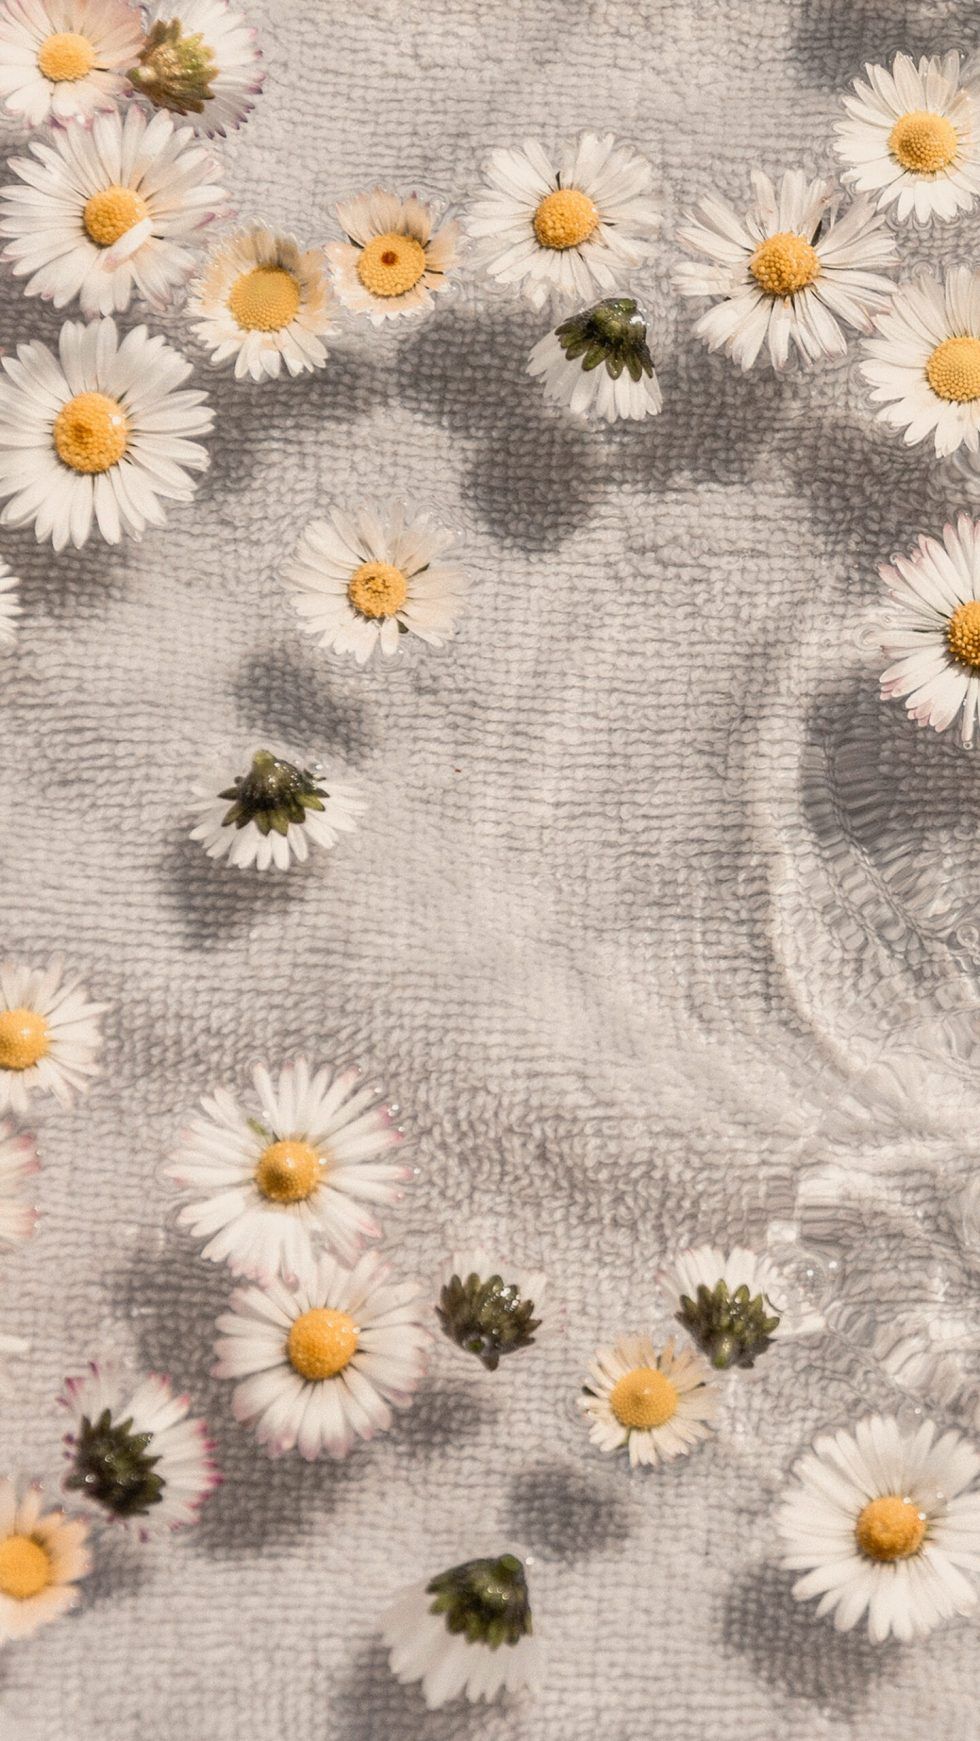 A close up of some daisies on the ground - Daisy